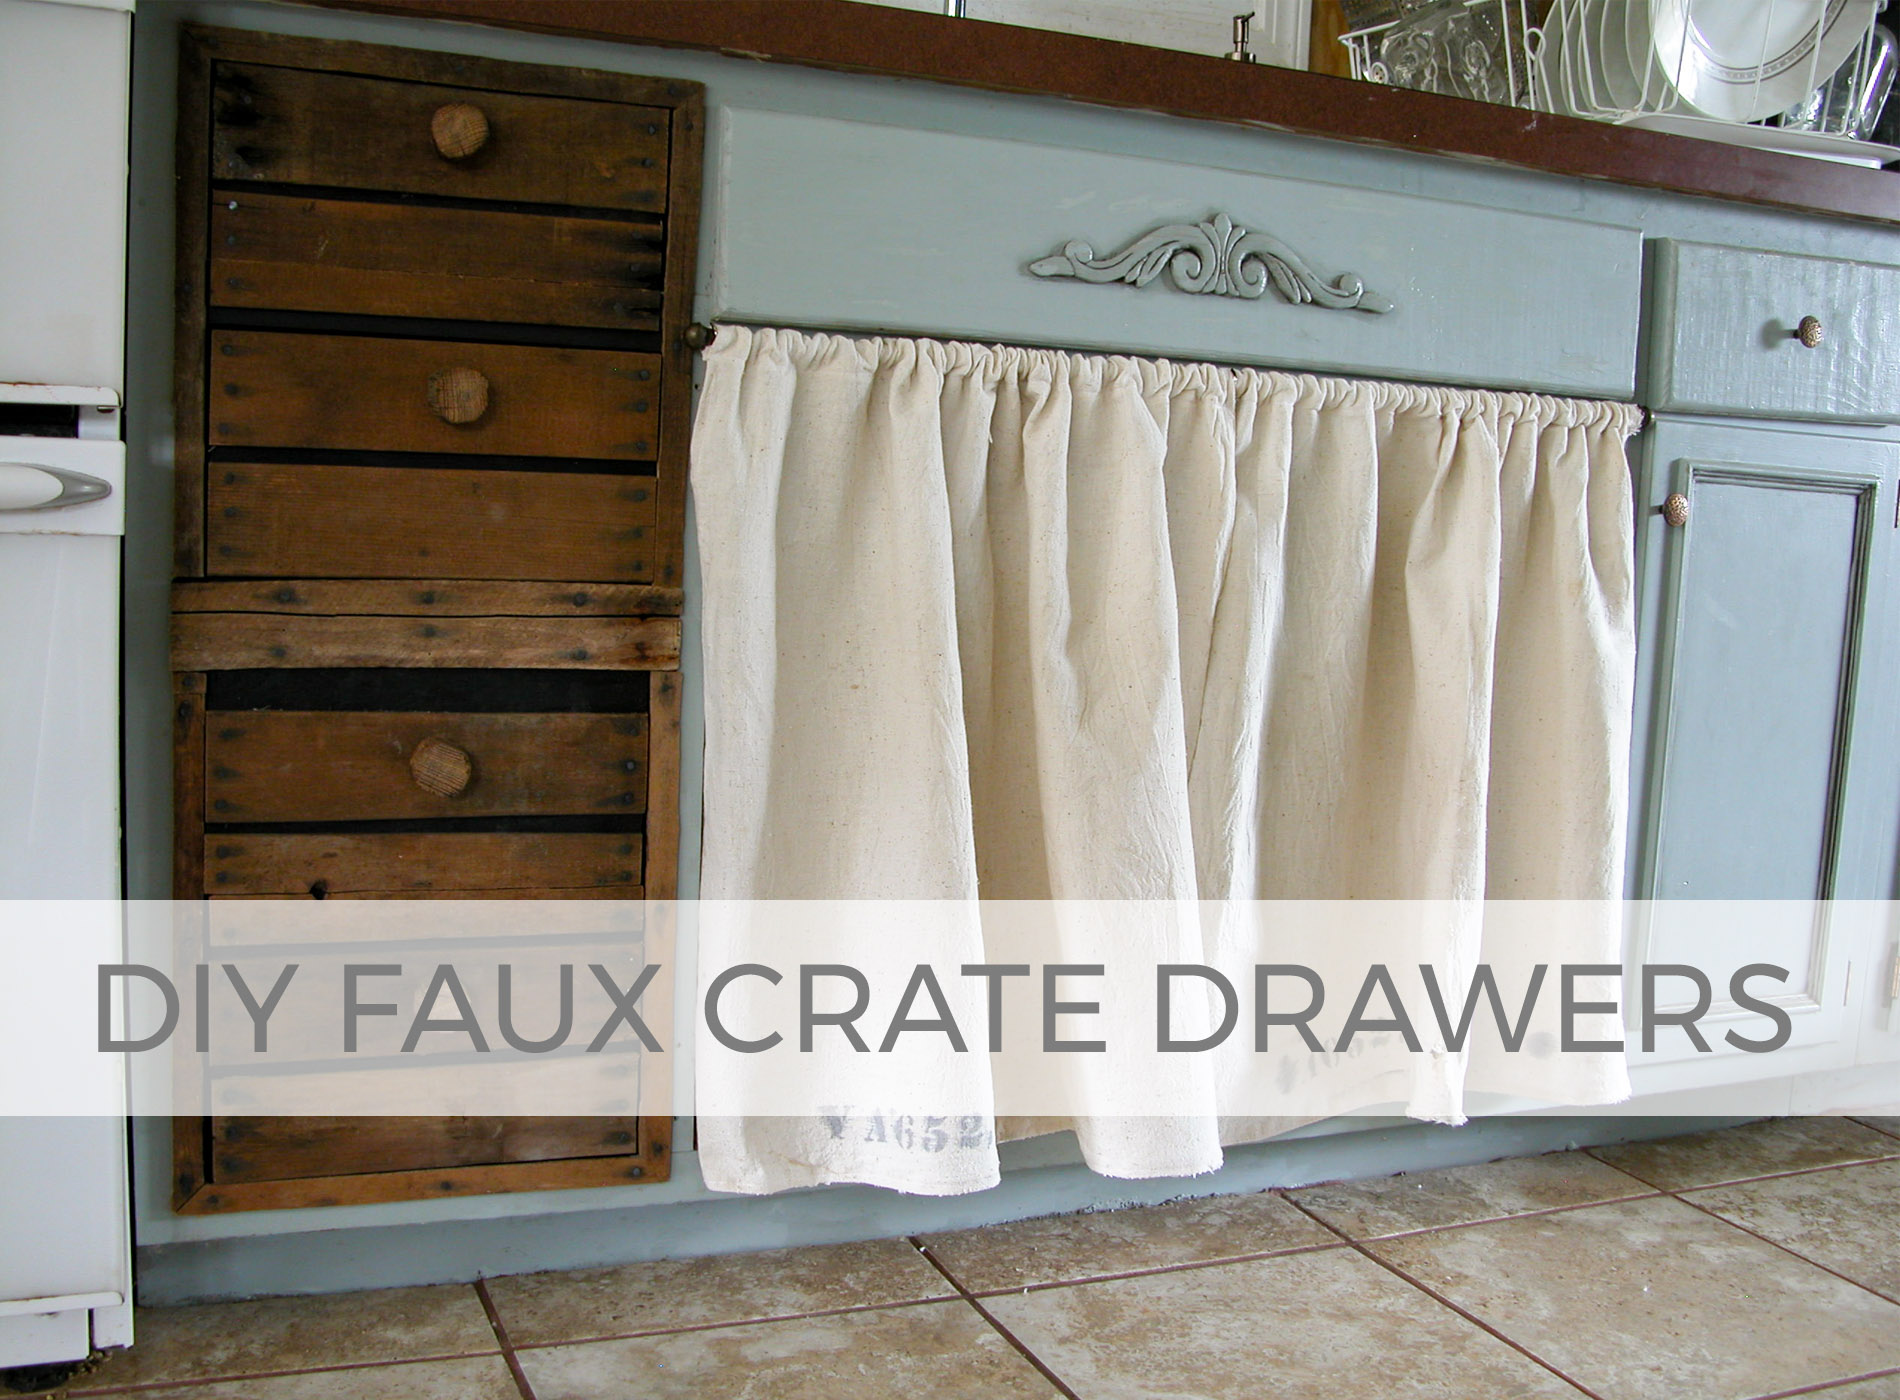 Get the rustic farmhouse feel with DIY Faux Crate Drawers by Larissa of Prodigal Pieces | prodigalpieces.com #prodigalpieces